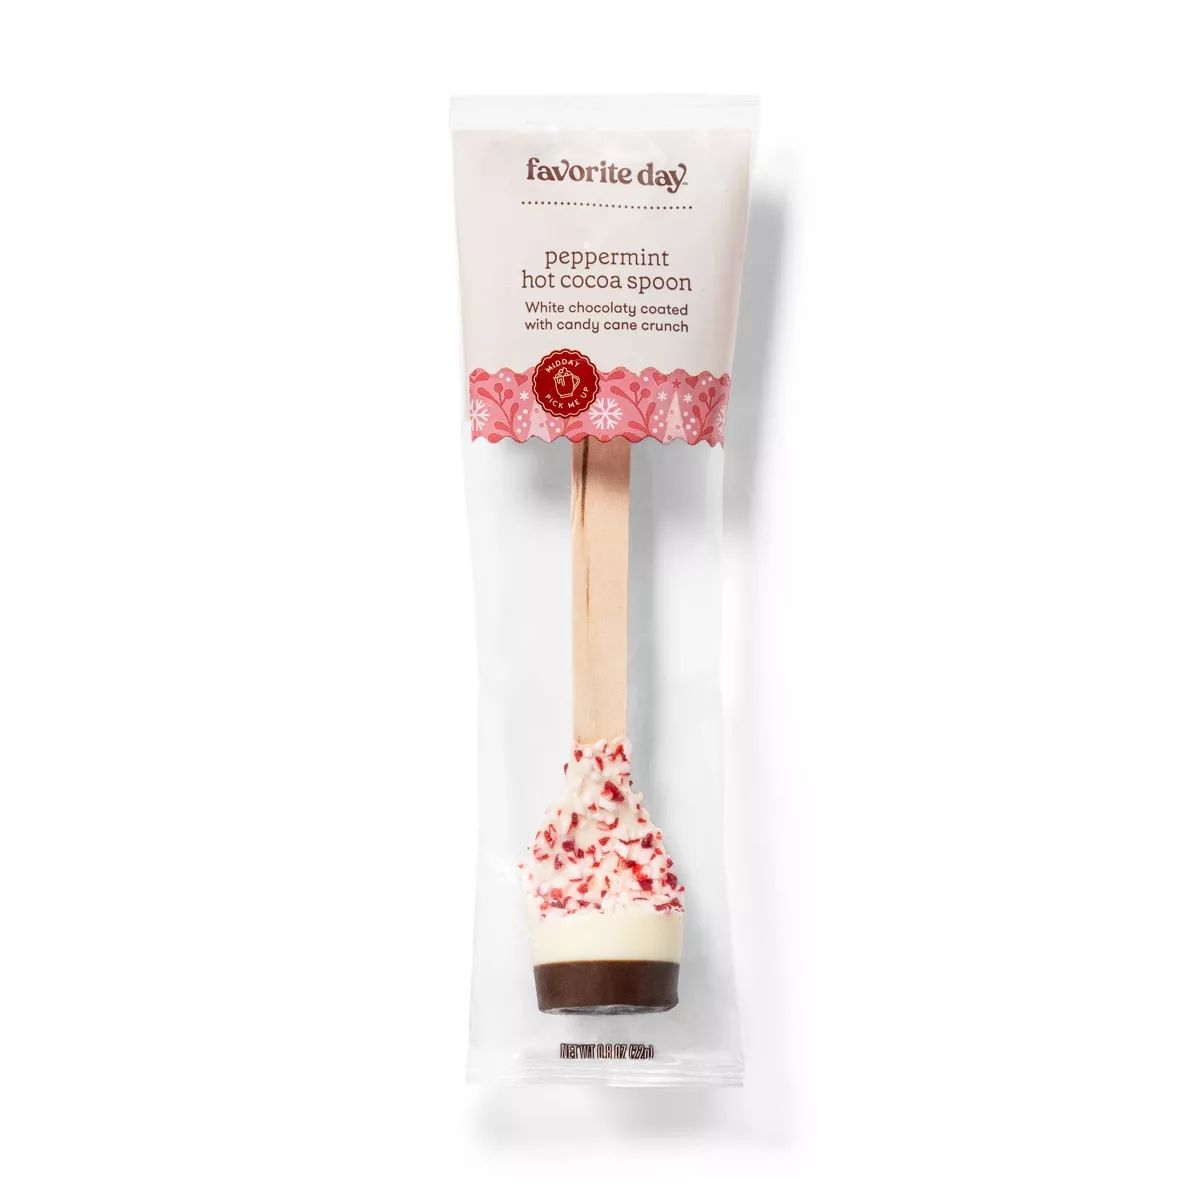 Holiday White Chocolaty Coated with Peppermint Hot Cocoa Spoon - 0.8oz - Favorite Day™ | Target